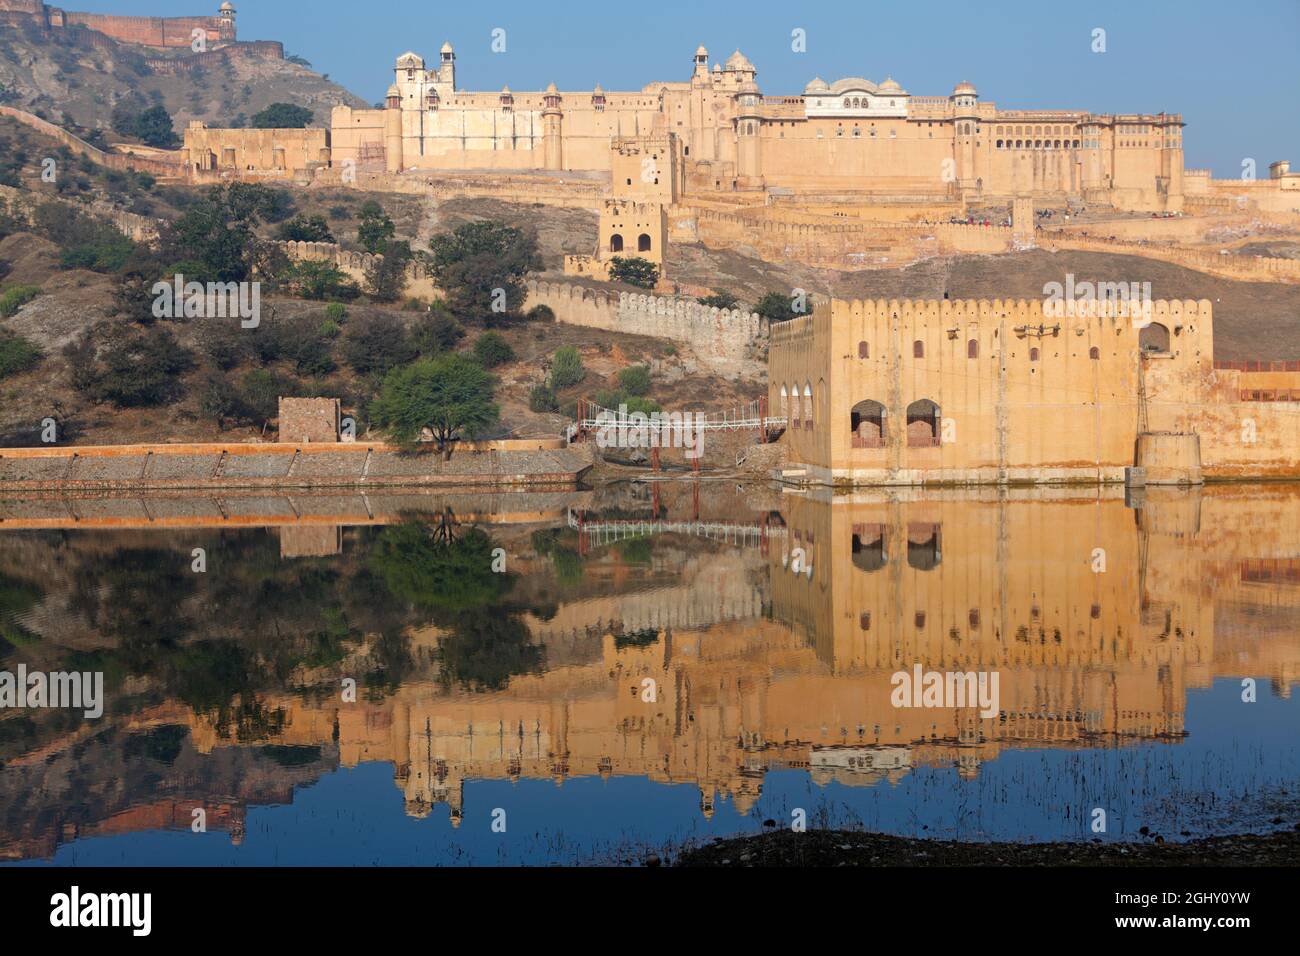 The Amber Fort reflected in the Maotha lake, Jaipur, India Stock Photo